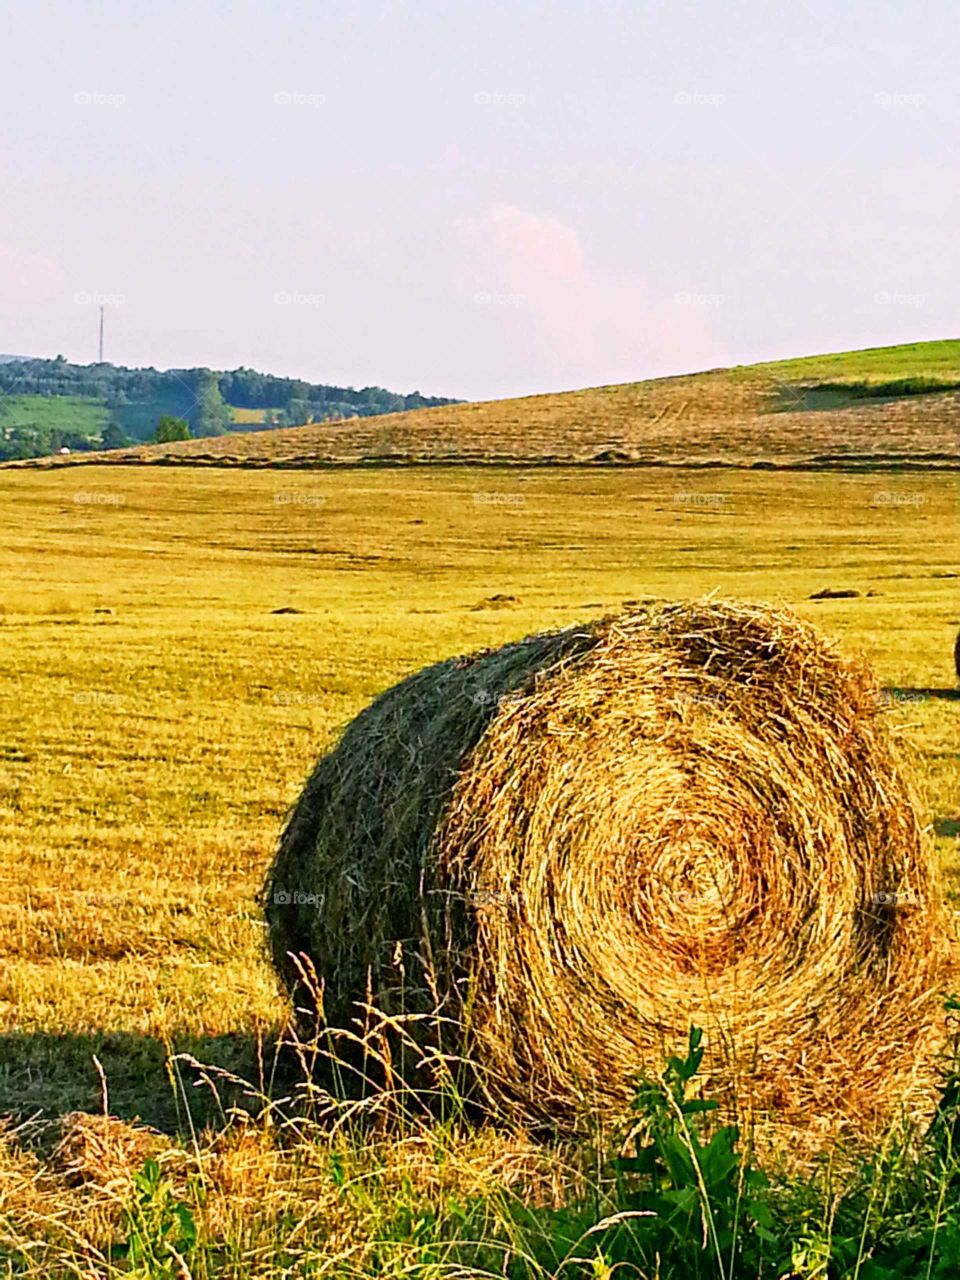 Bales of hay sit freshly cut in a field at the end of summer.